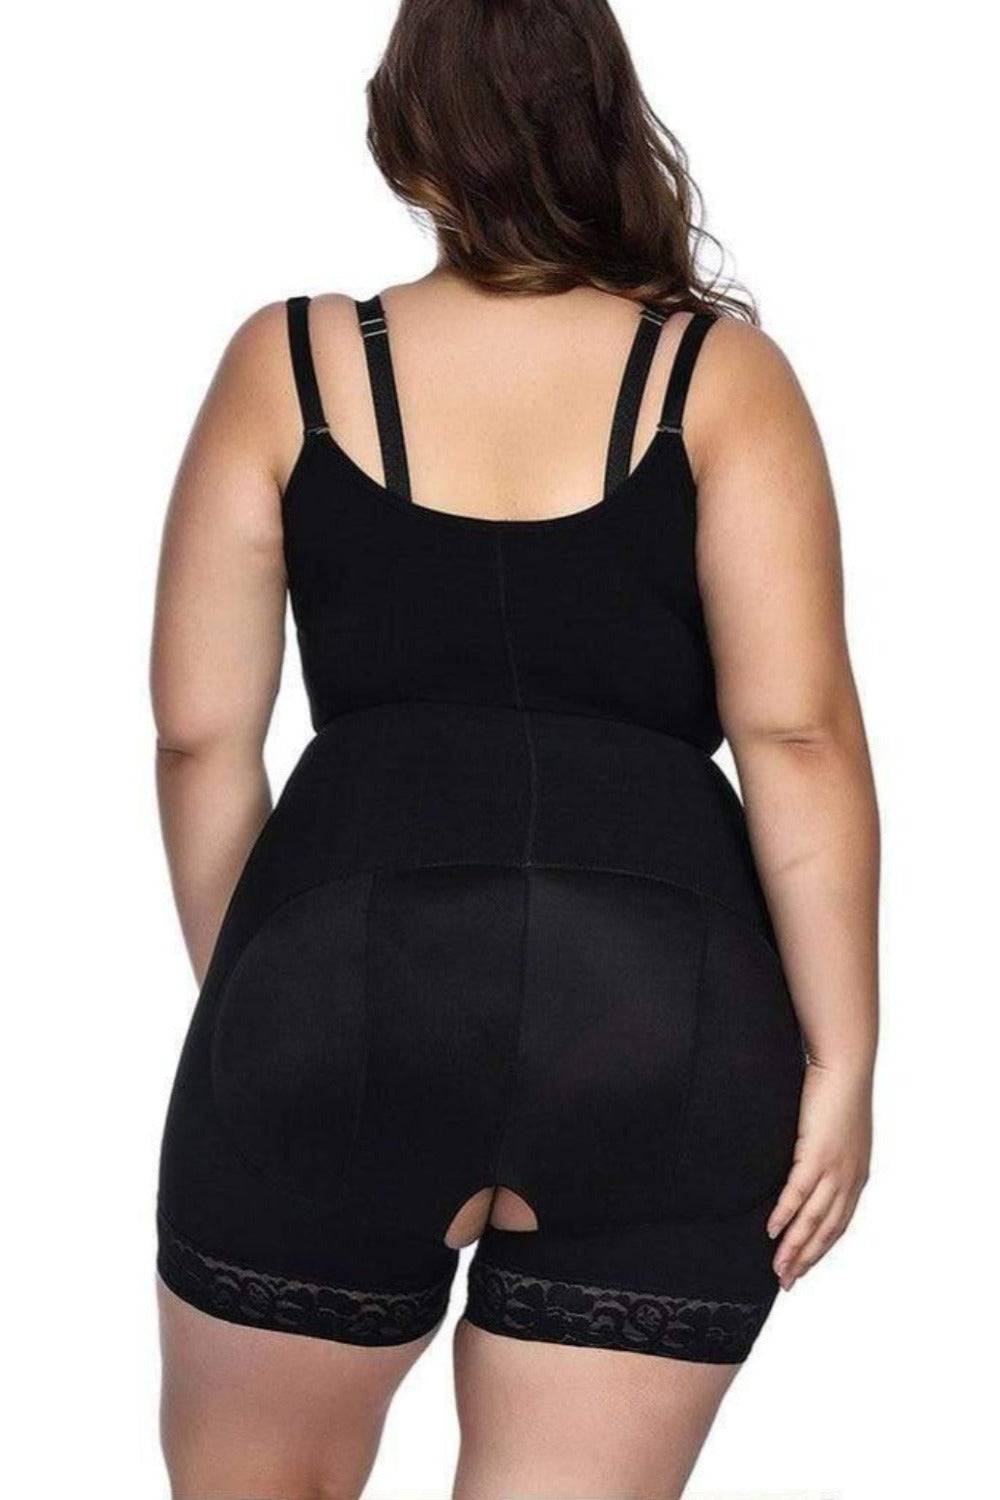 WGHJK Women's Firm Girdle High Back Continuous Wide Strap Body Shaper Tummy  Control Shapewear Girdle (Color : A, Size : X-Large) : : Fashion